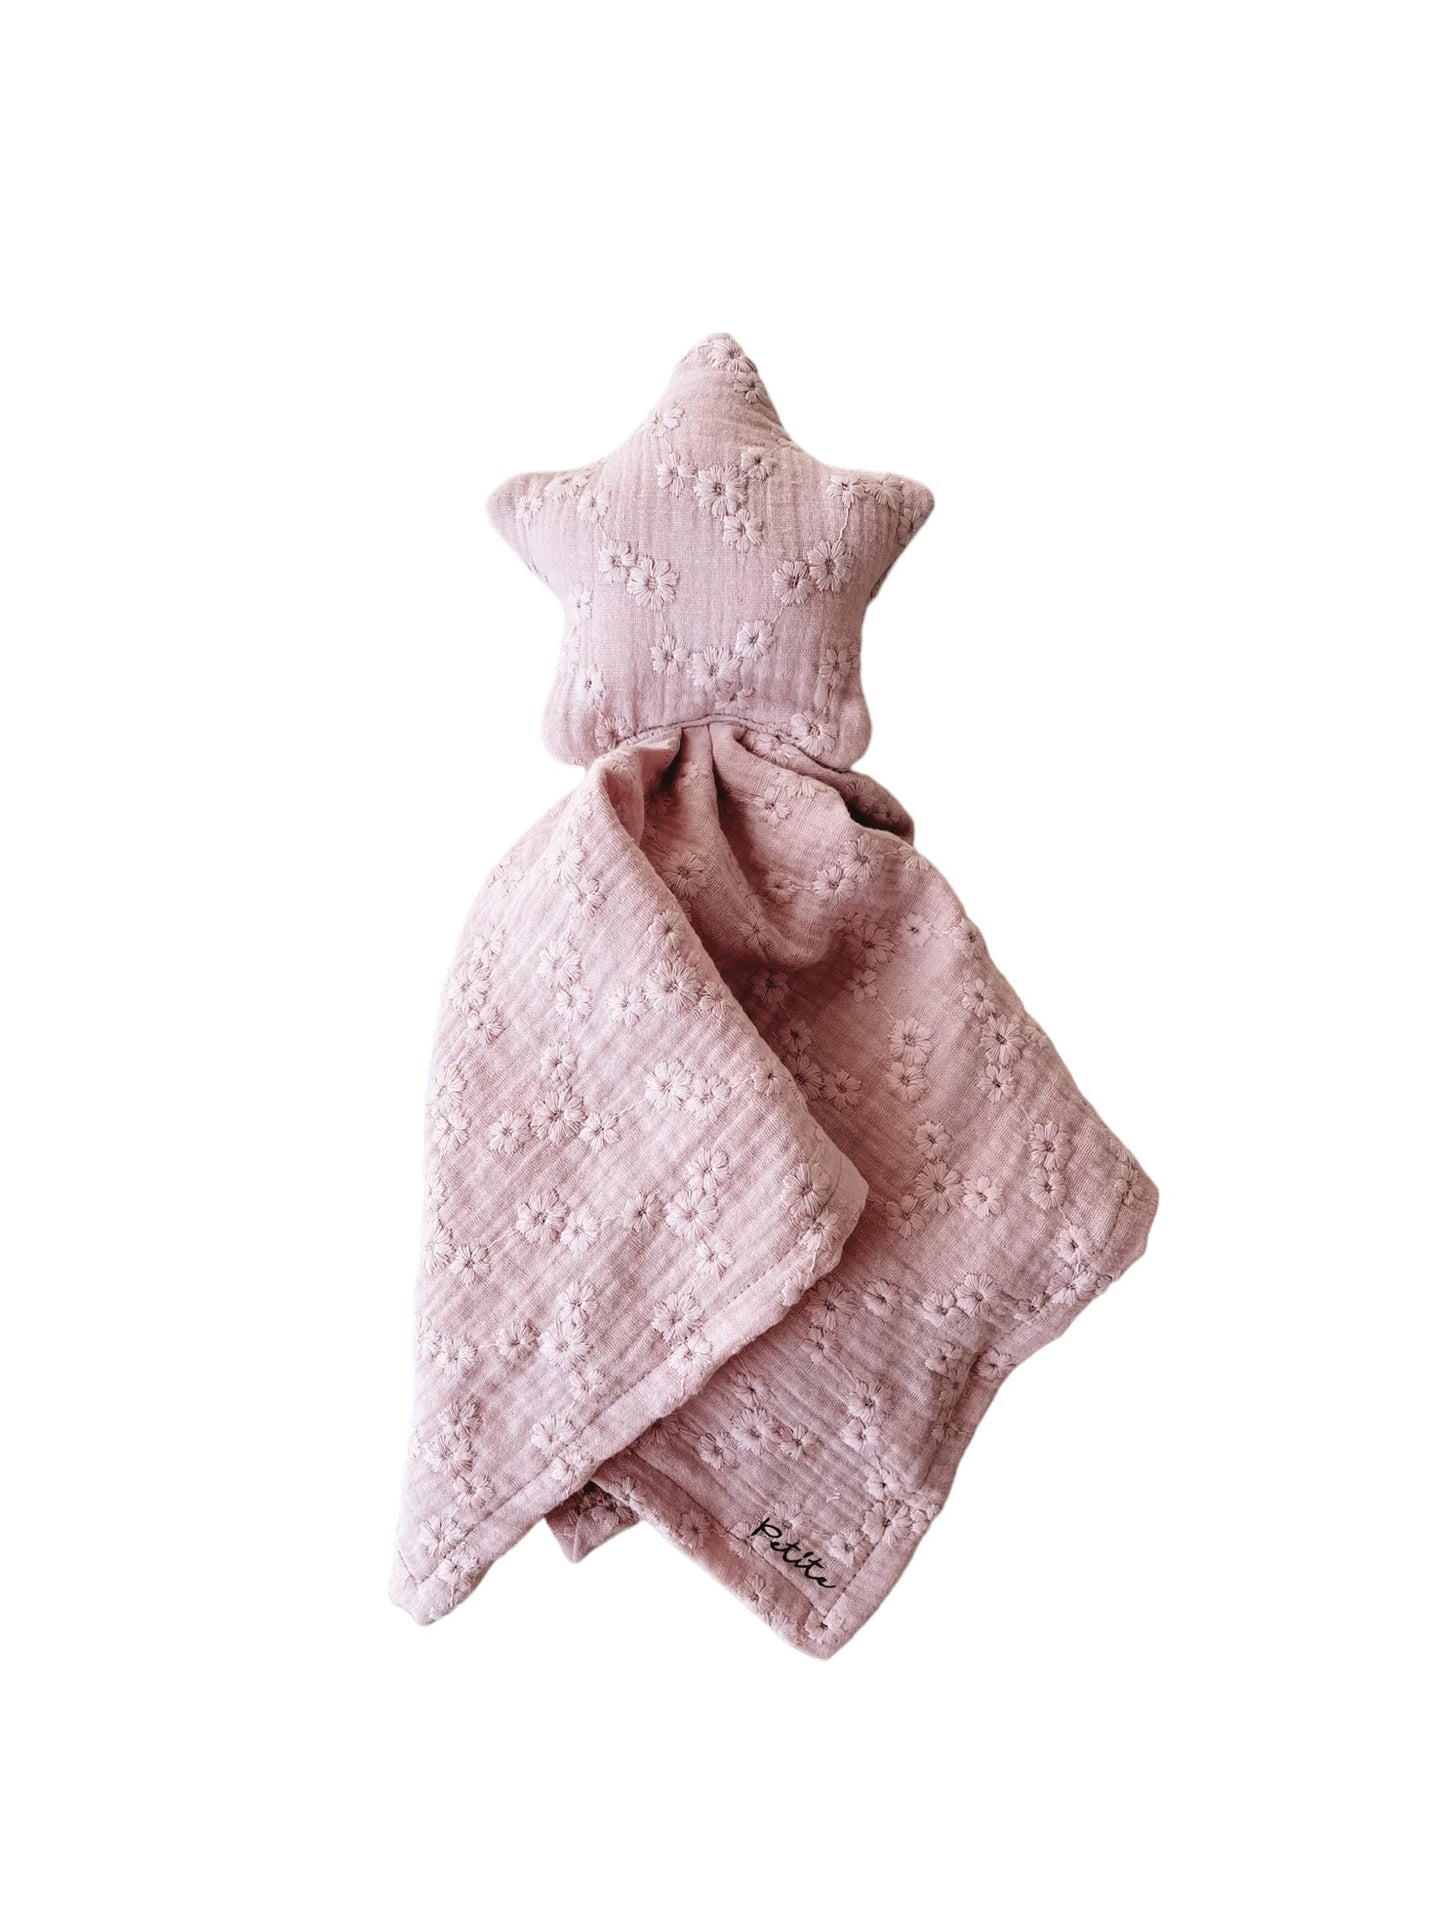 Little star cuddle cloth / embroidered blush